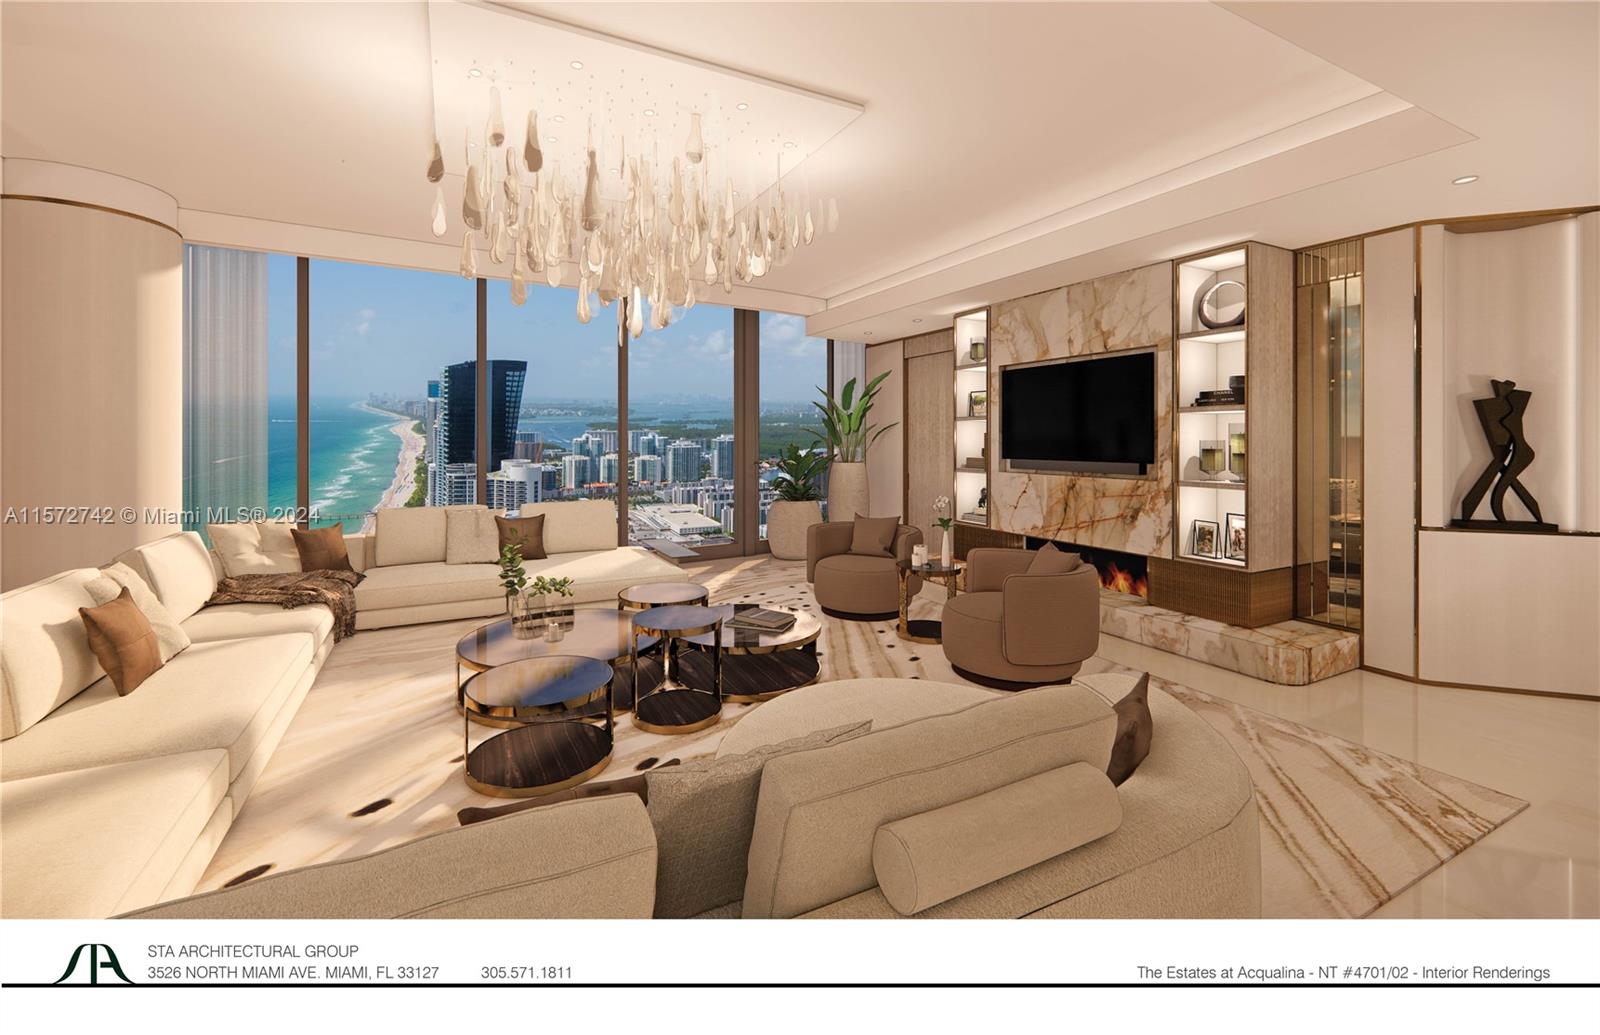 Spectacular Mansions in the sky. Full floor 5 bedrooms 7 bath residence delivered with a 1.7M Luxury Living furniture package. This custom home in the New Estates at Acqualina in the North Tower will be ready to move in third quarter 2024. Outdoor paradise with 1200 sq ft terraces with unobstructed views. Forbes 5 Star 5 Diamond Services, Concierge, Security, Rolls Royce house car, Restaurants including Avra, ILMulino, Ke-uh and Costa Grill. Fitness, Spa, Beach Club. Enjoy the Estates private amenities including bowling, ice skating, Wall Street Traders room, Speakeasy, beachfront pools, House car service  and so much more. Enjoy what the Five star, Five diamond Acqualina lifestyle has to offer and be amongst the selected few that get to call the Estates at Acqualina home!